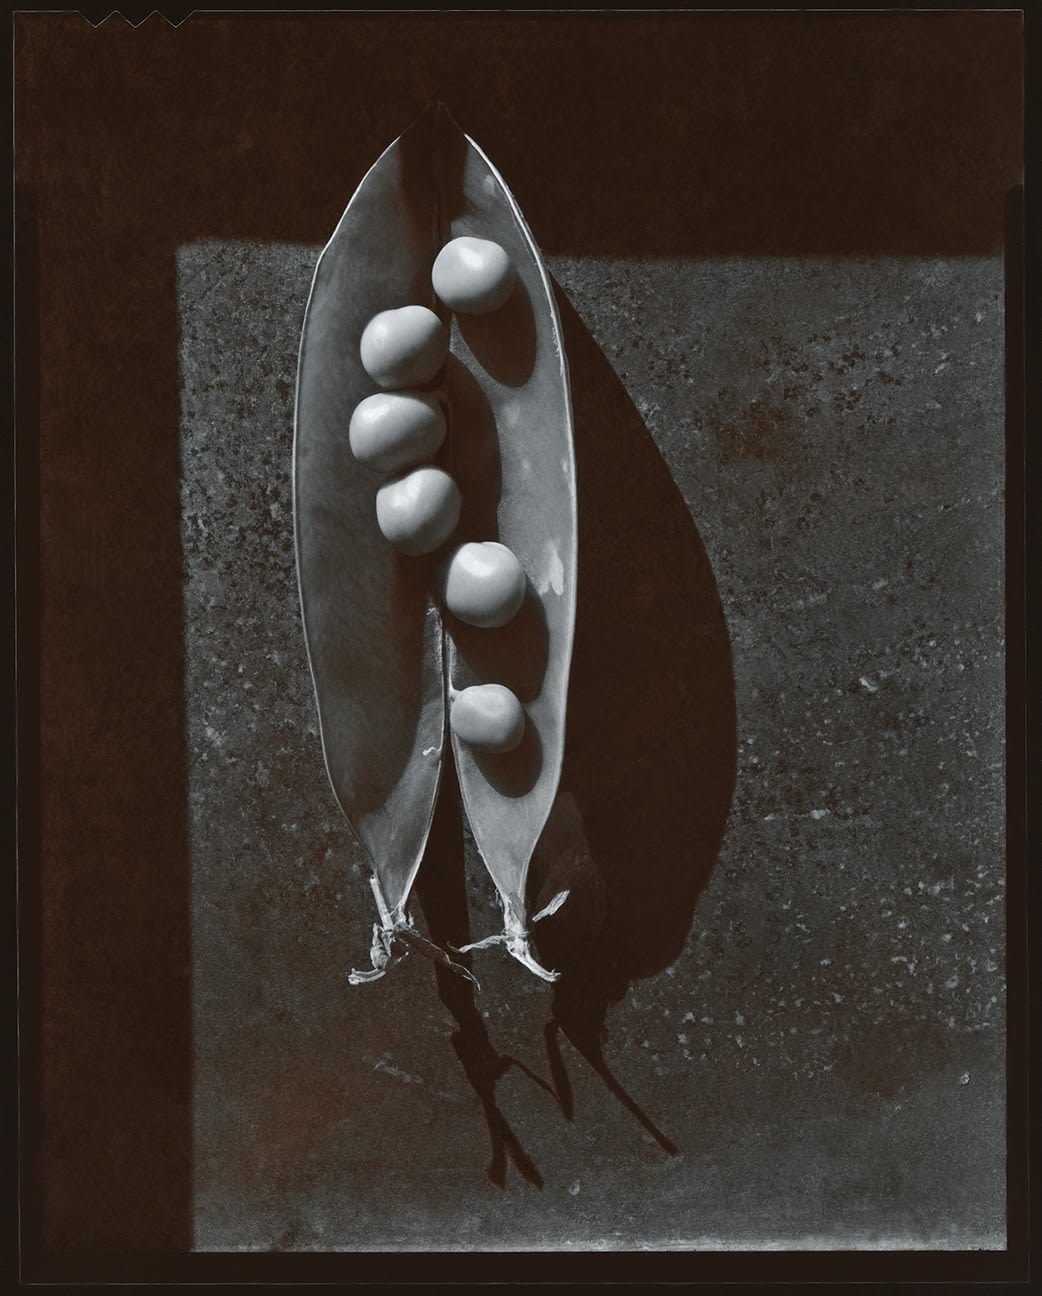 Olivia Parker, Pea Pod #14 from the series Signs of Life, 1976